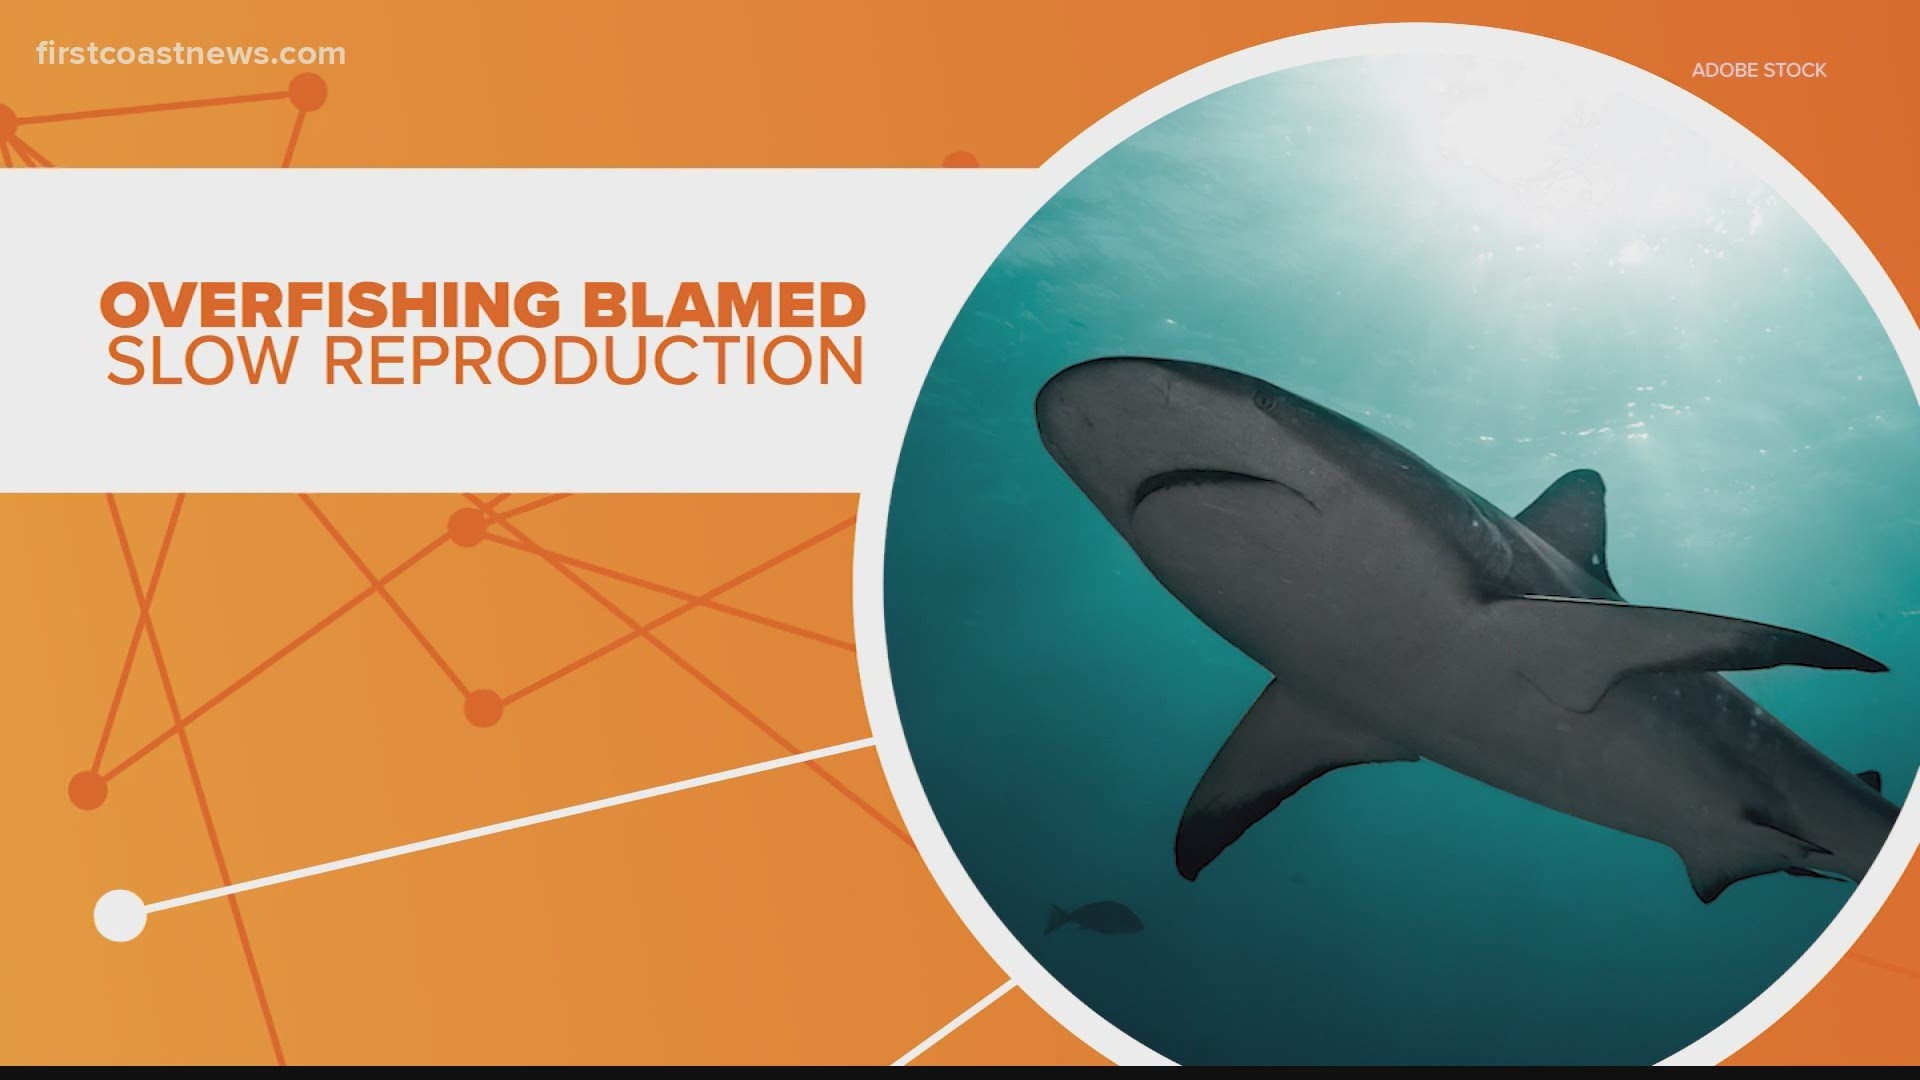 The number of sharks and rays in the ocean has plummeted 70% since 1970, largely due to overfishing.